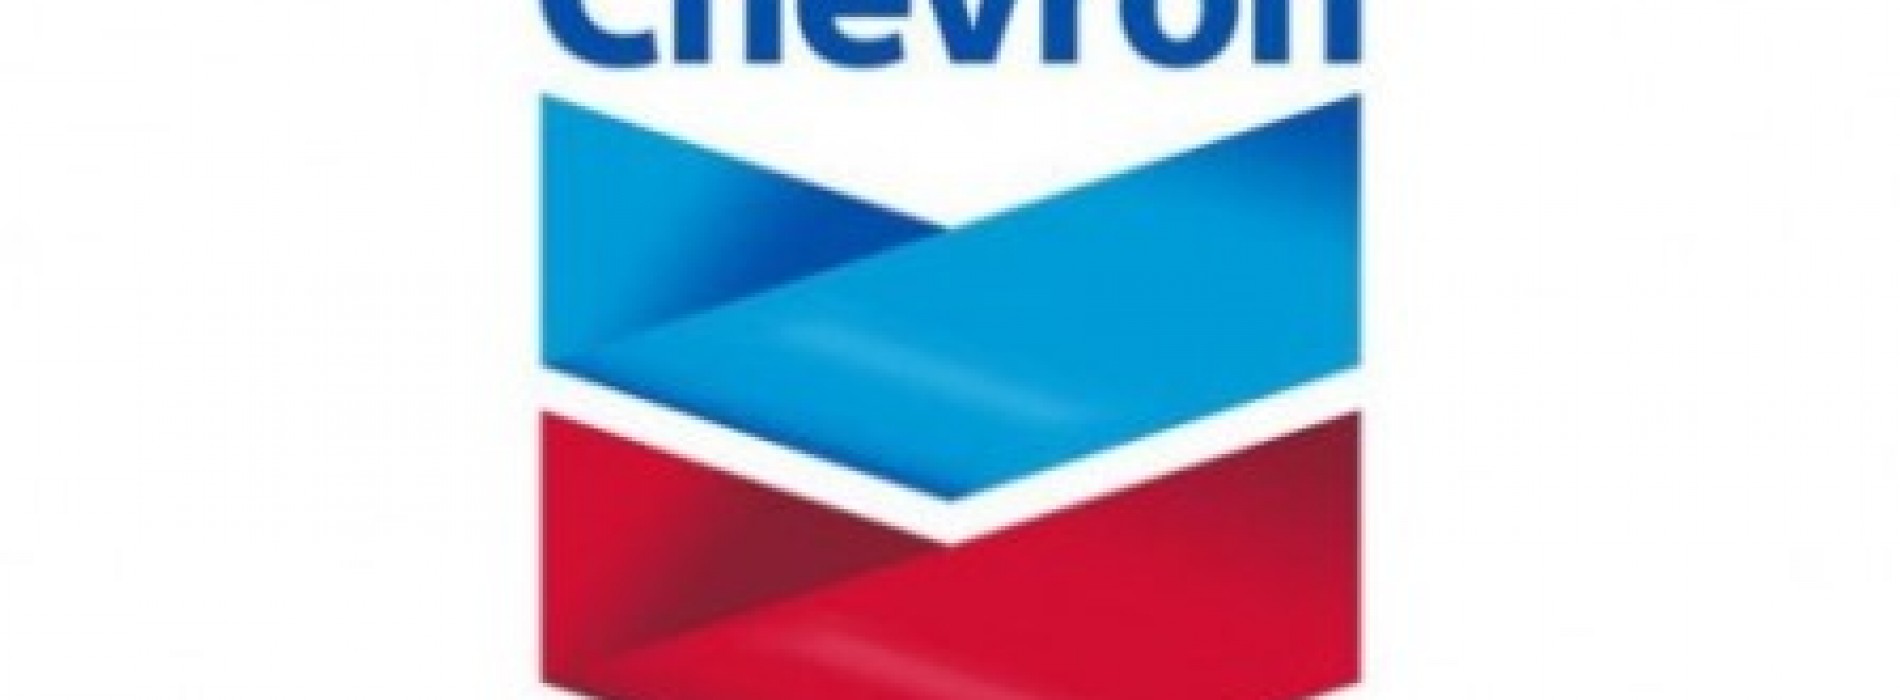 Chevron, Agbami partners boost North East reconstruction